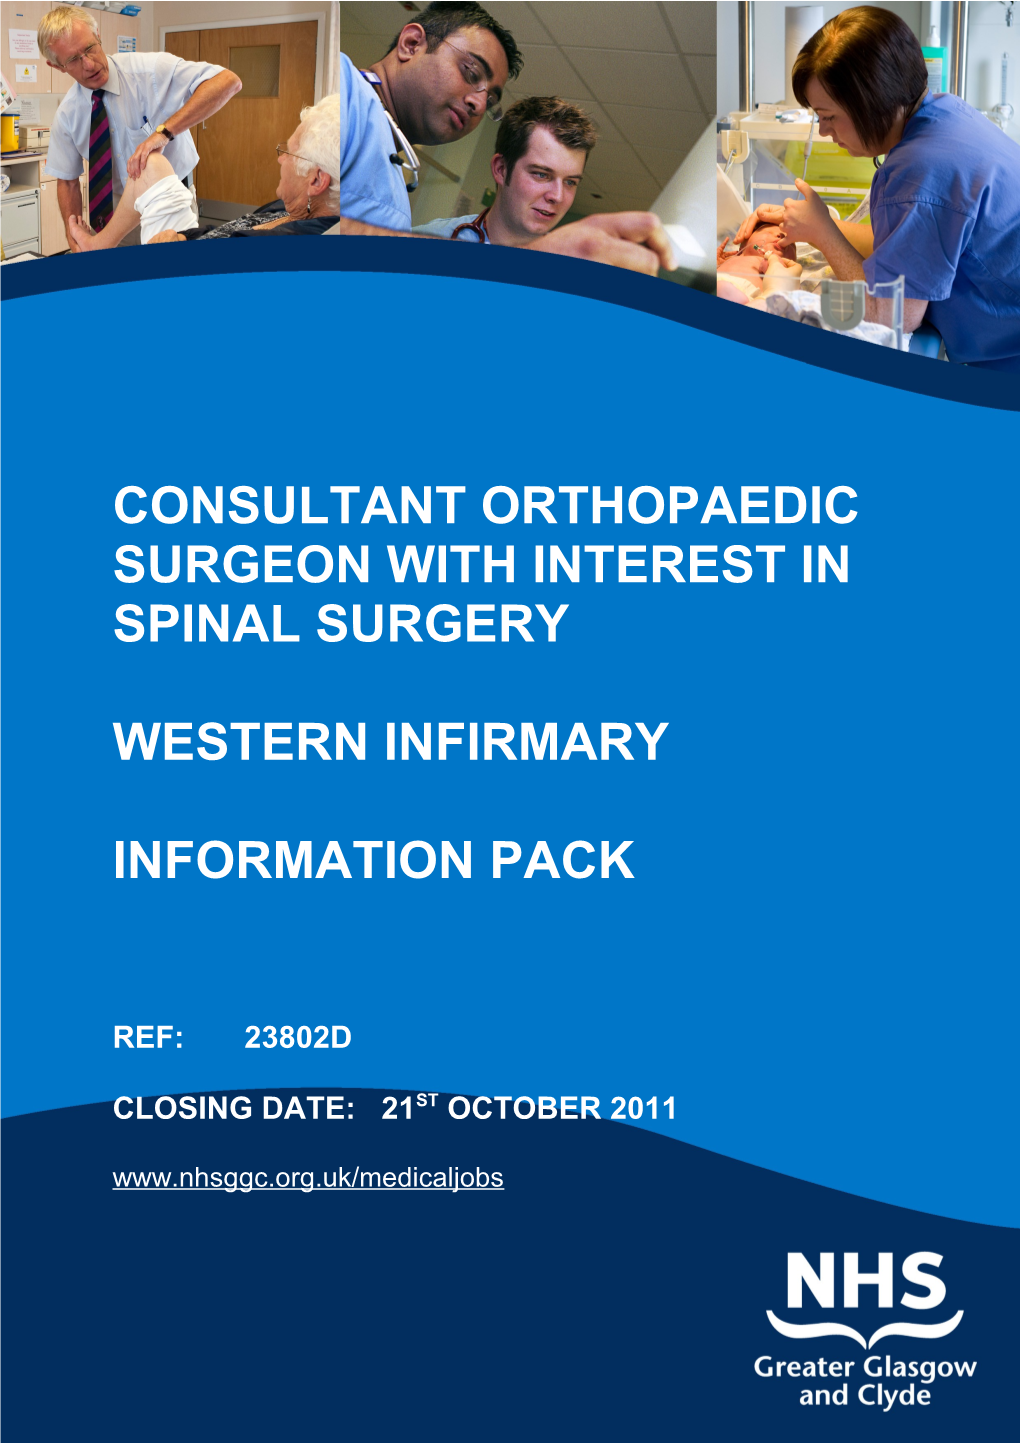 CONSULTANT ORTHOPAEDIC SURGEON with INTEREST in SPINAL Surgery